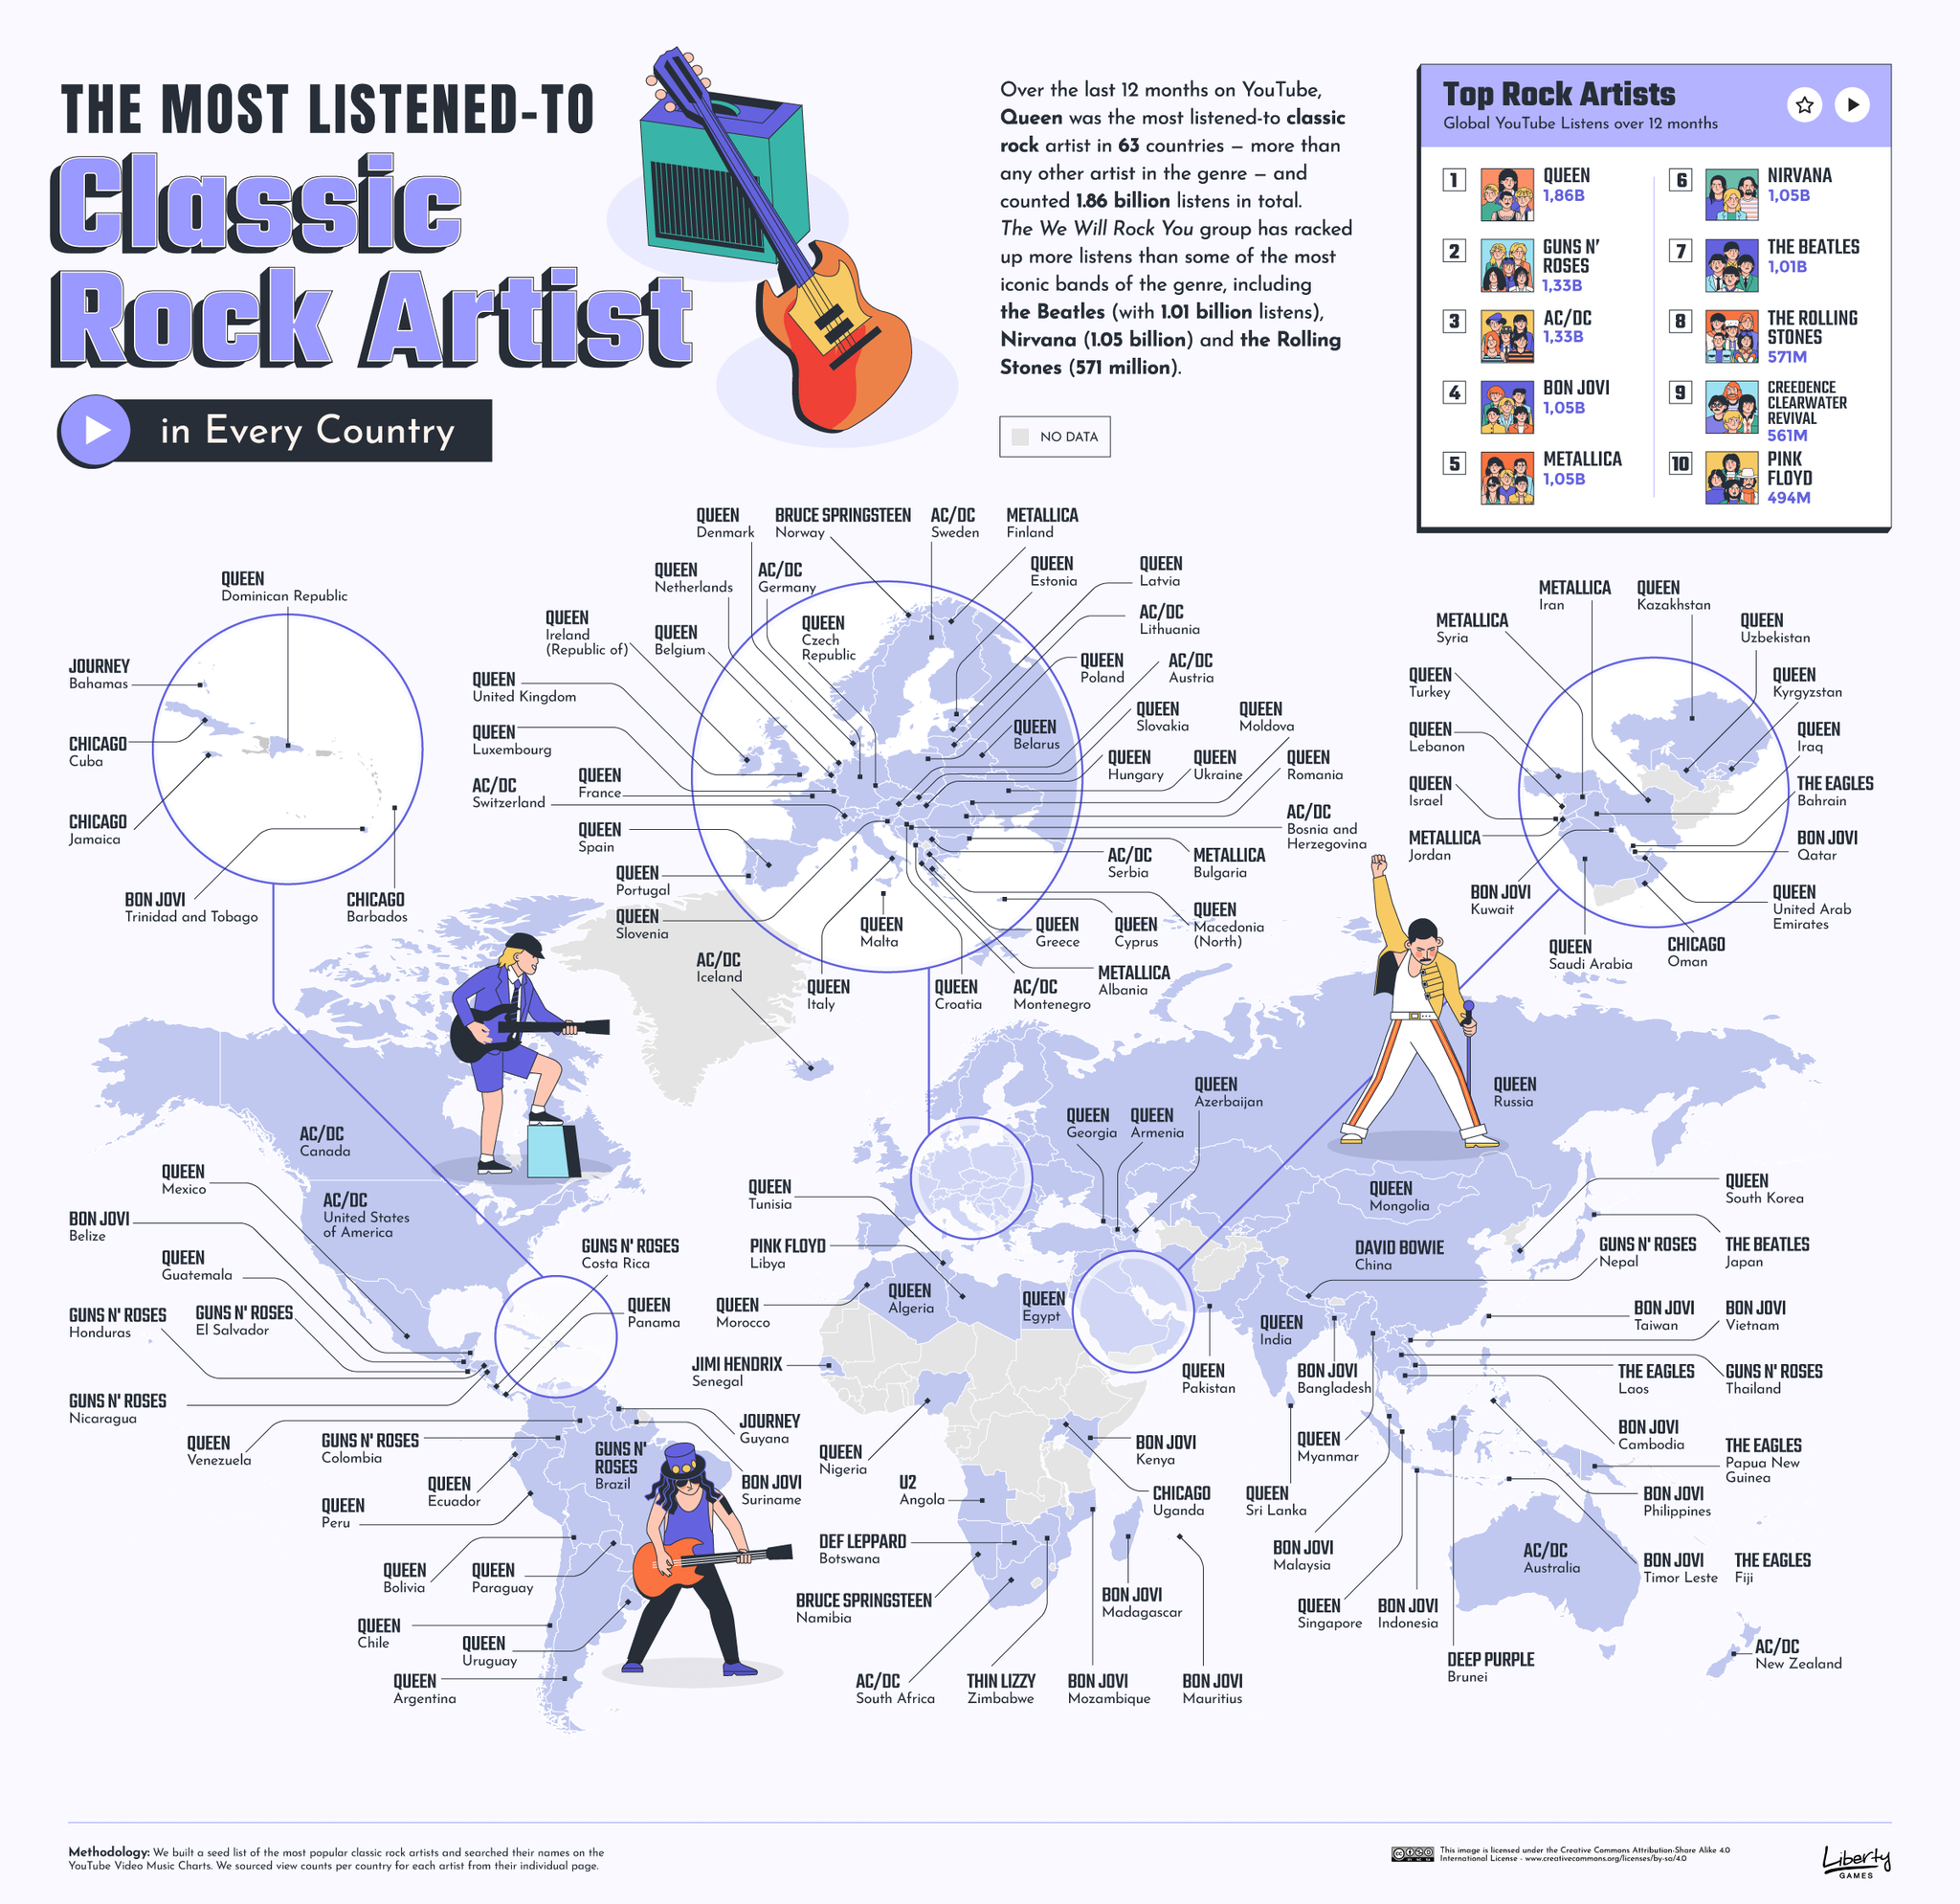 Every country's most listened-to classic rock artist